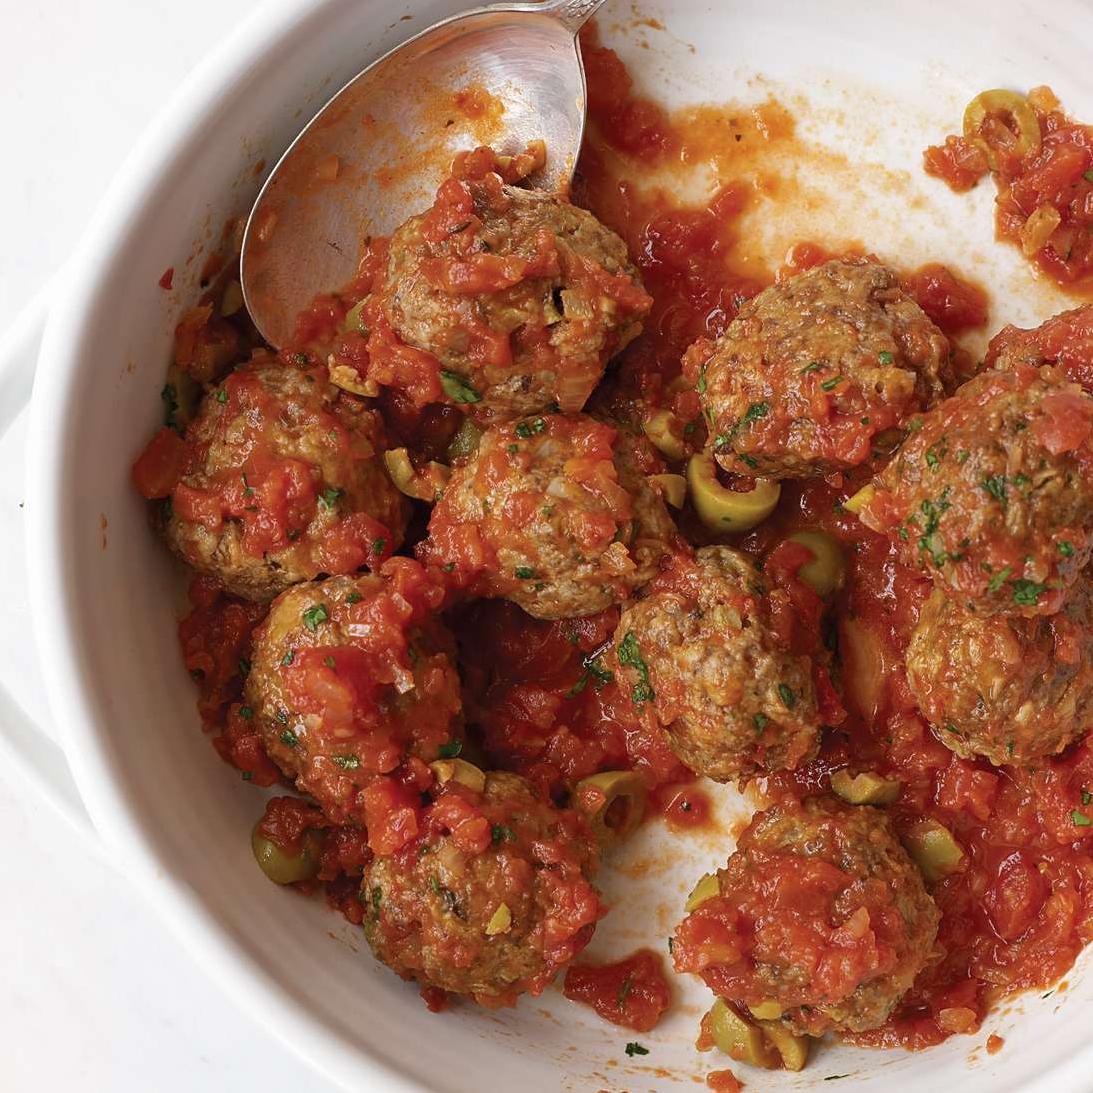  You'll want to lick the bowl clean after trying this meatball recipe.